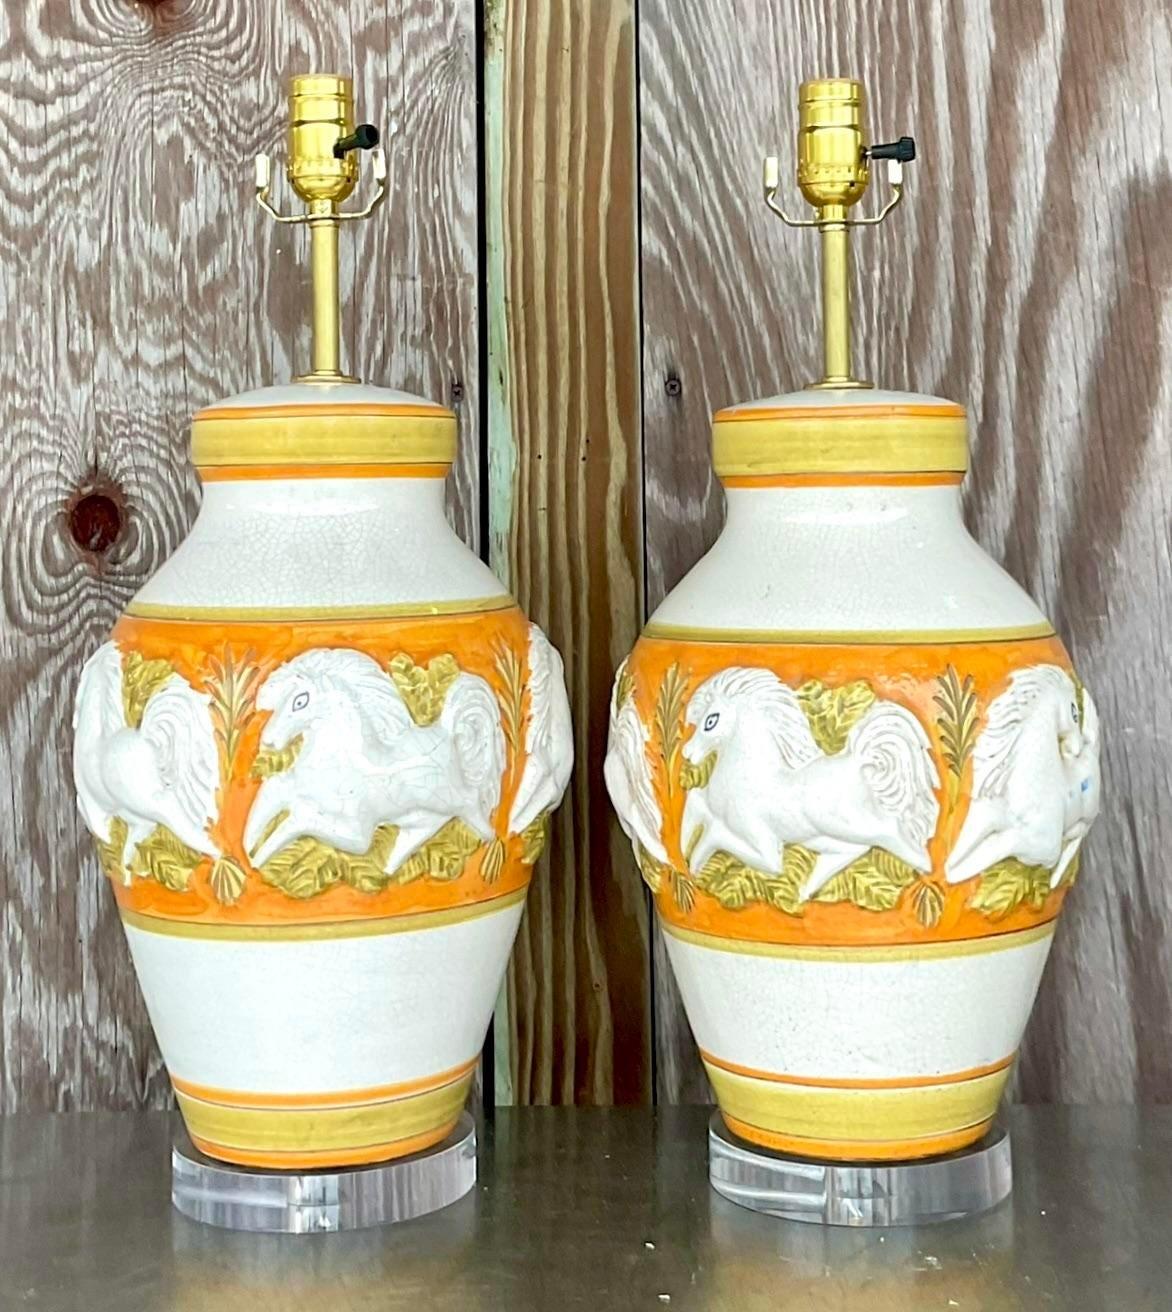 20th Century Vintage Mid-Century Modern Glazed Ceramic Prancing Horse Lamps - a Pair For Sale